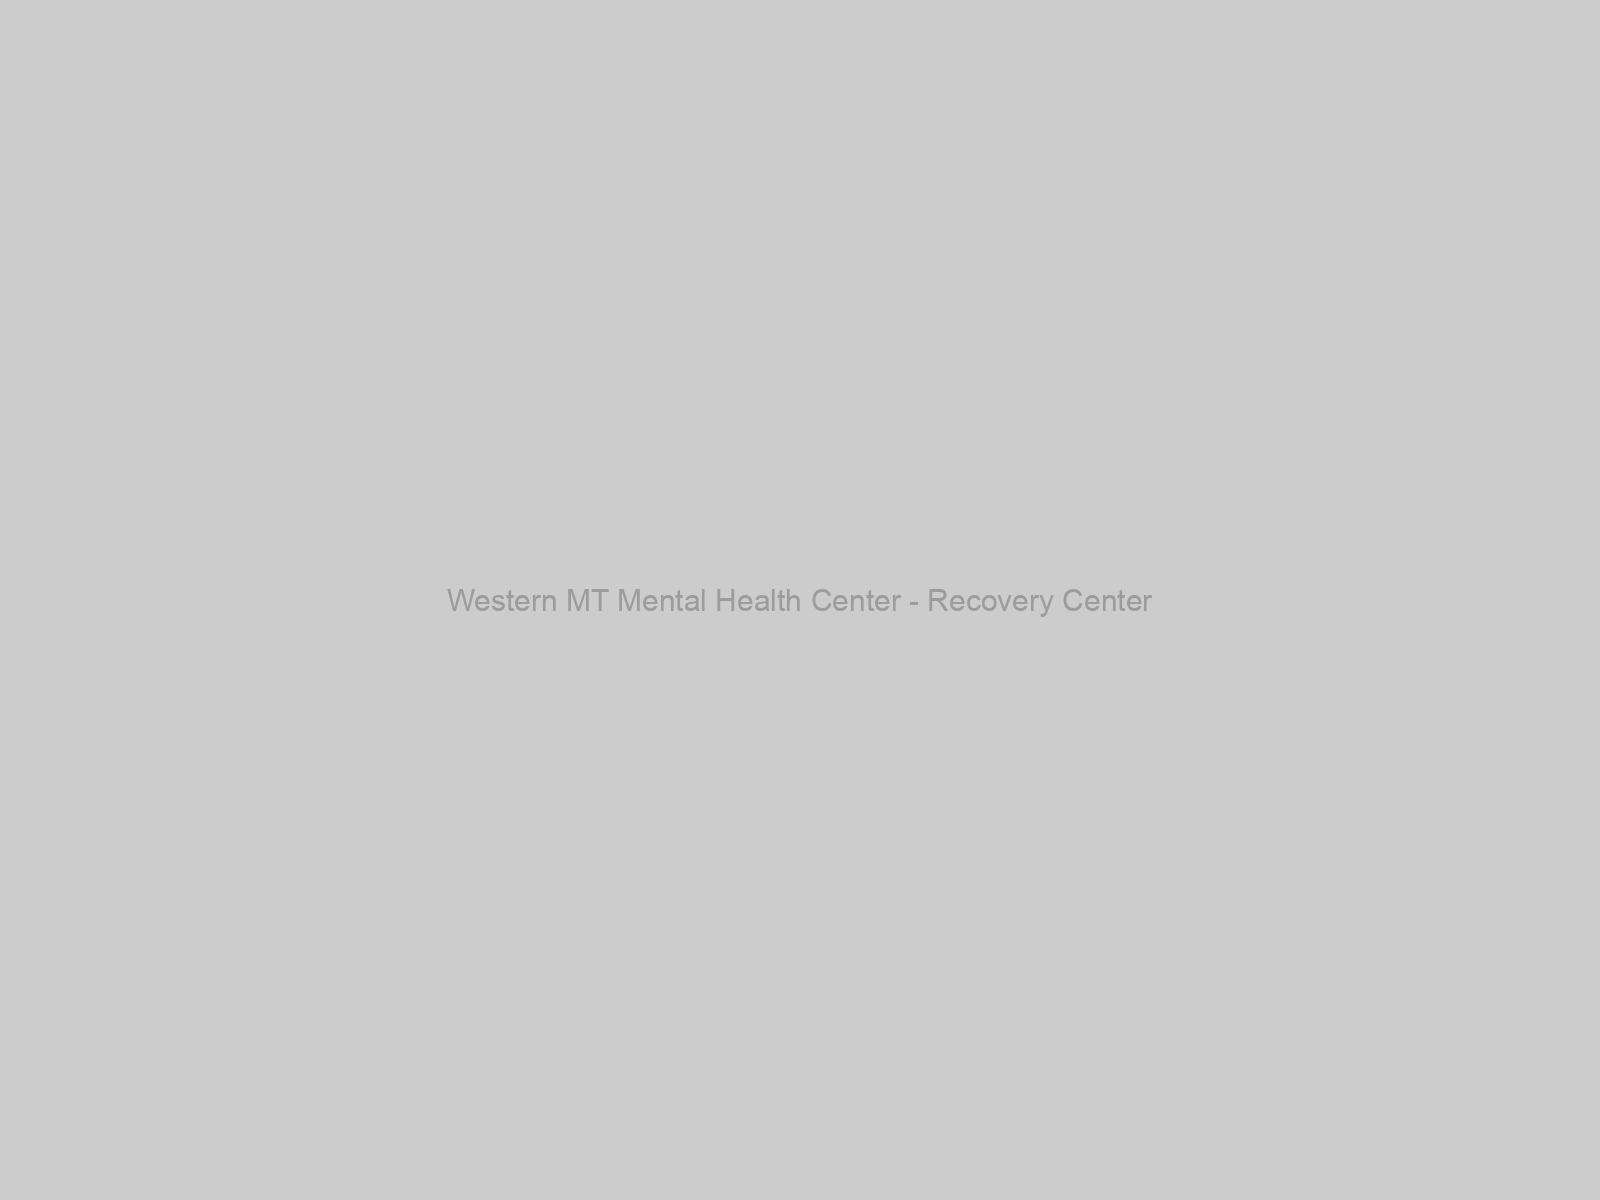 Western MT Mental Health Center - Recovery Center